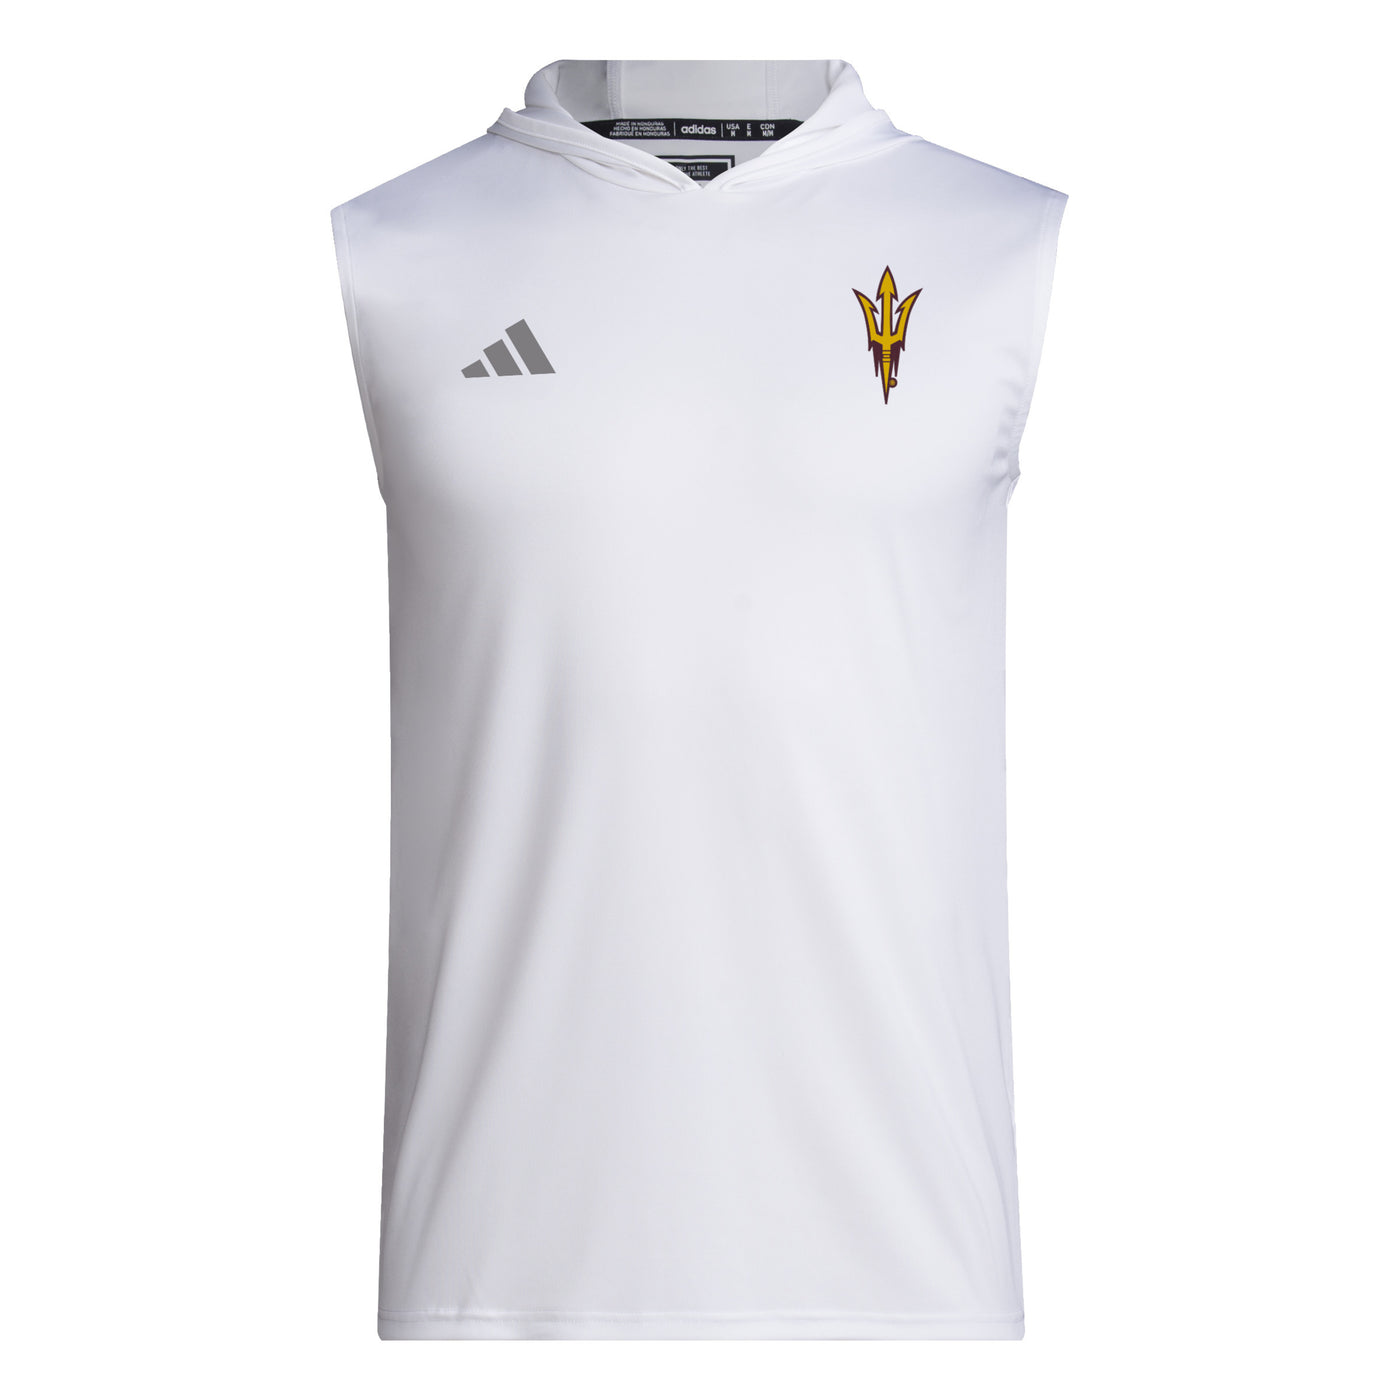 ASU white sleeveless hood with pitchfork logo on one side of the chest and a grey adidas logo on the other side.